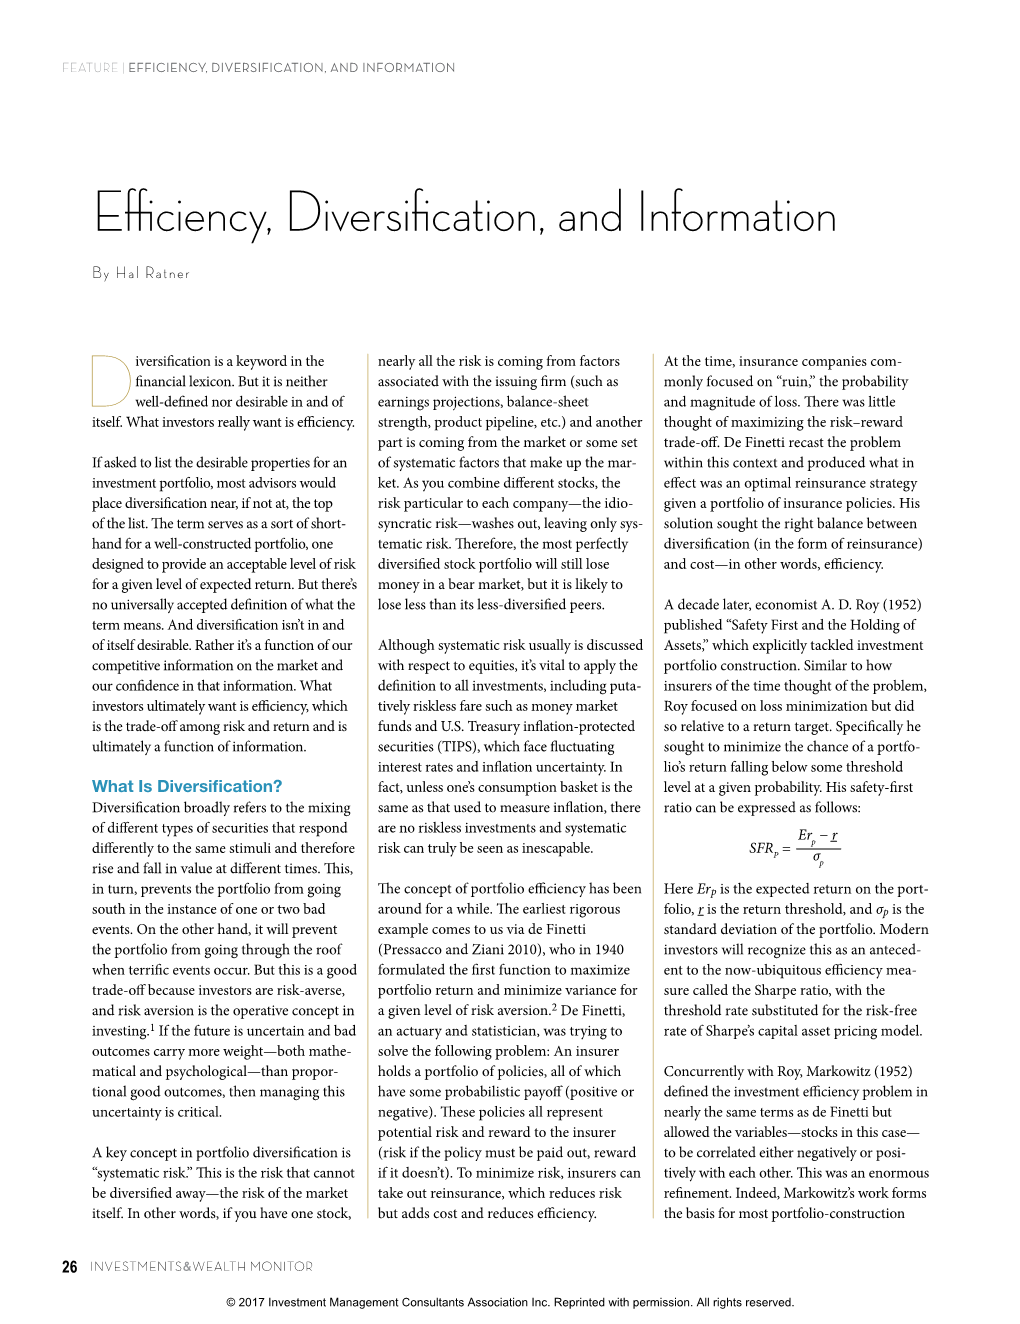 Efficiency, Diversification, and Information